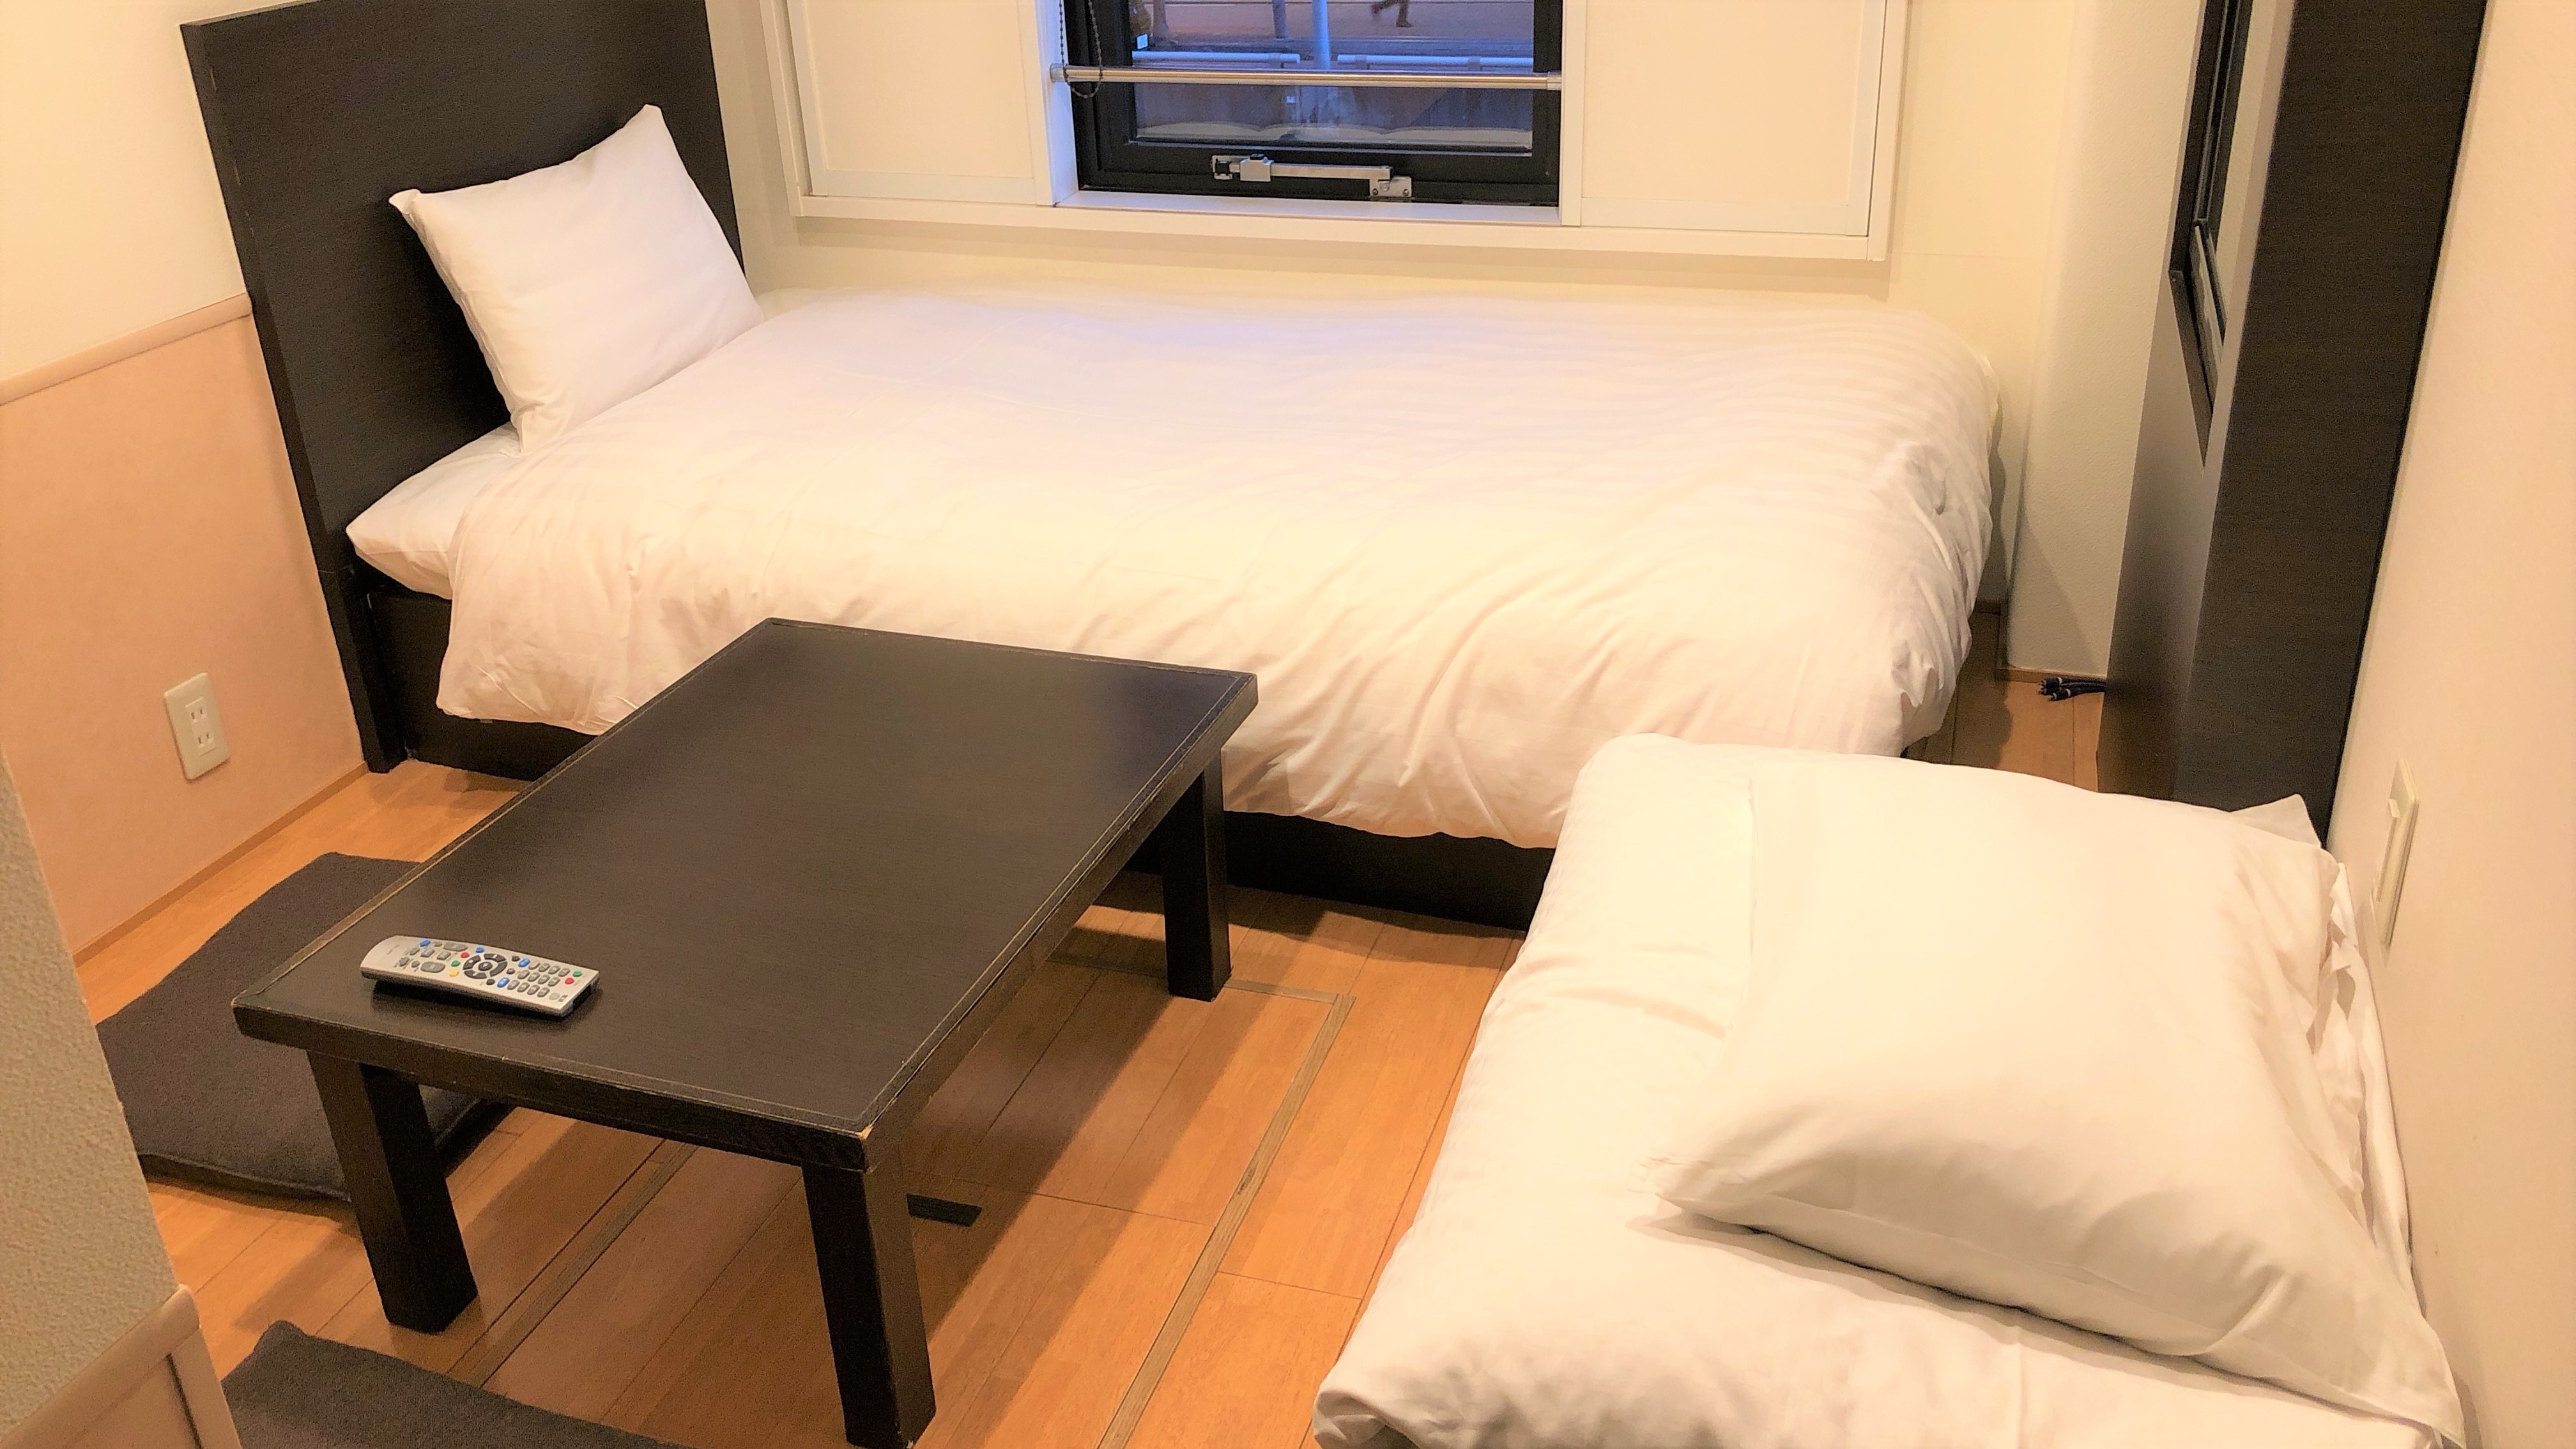 Flat room 12㎡ for 2 people (bed / futon) Non-smoking room where you can take off your shoes and relax)